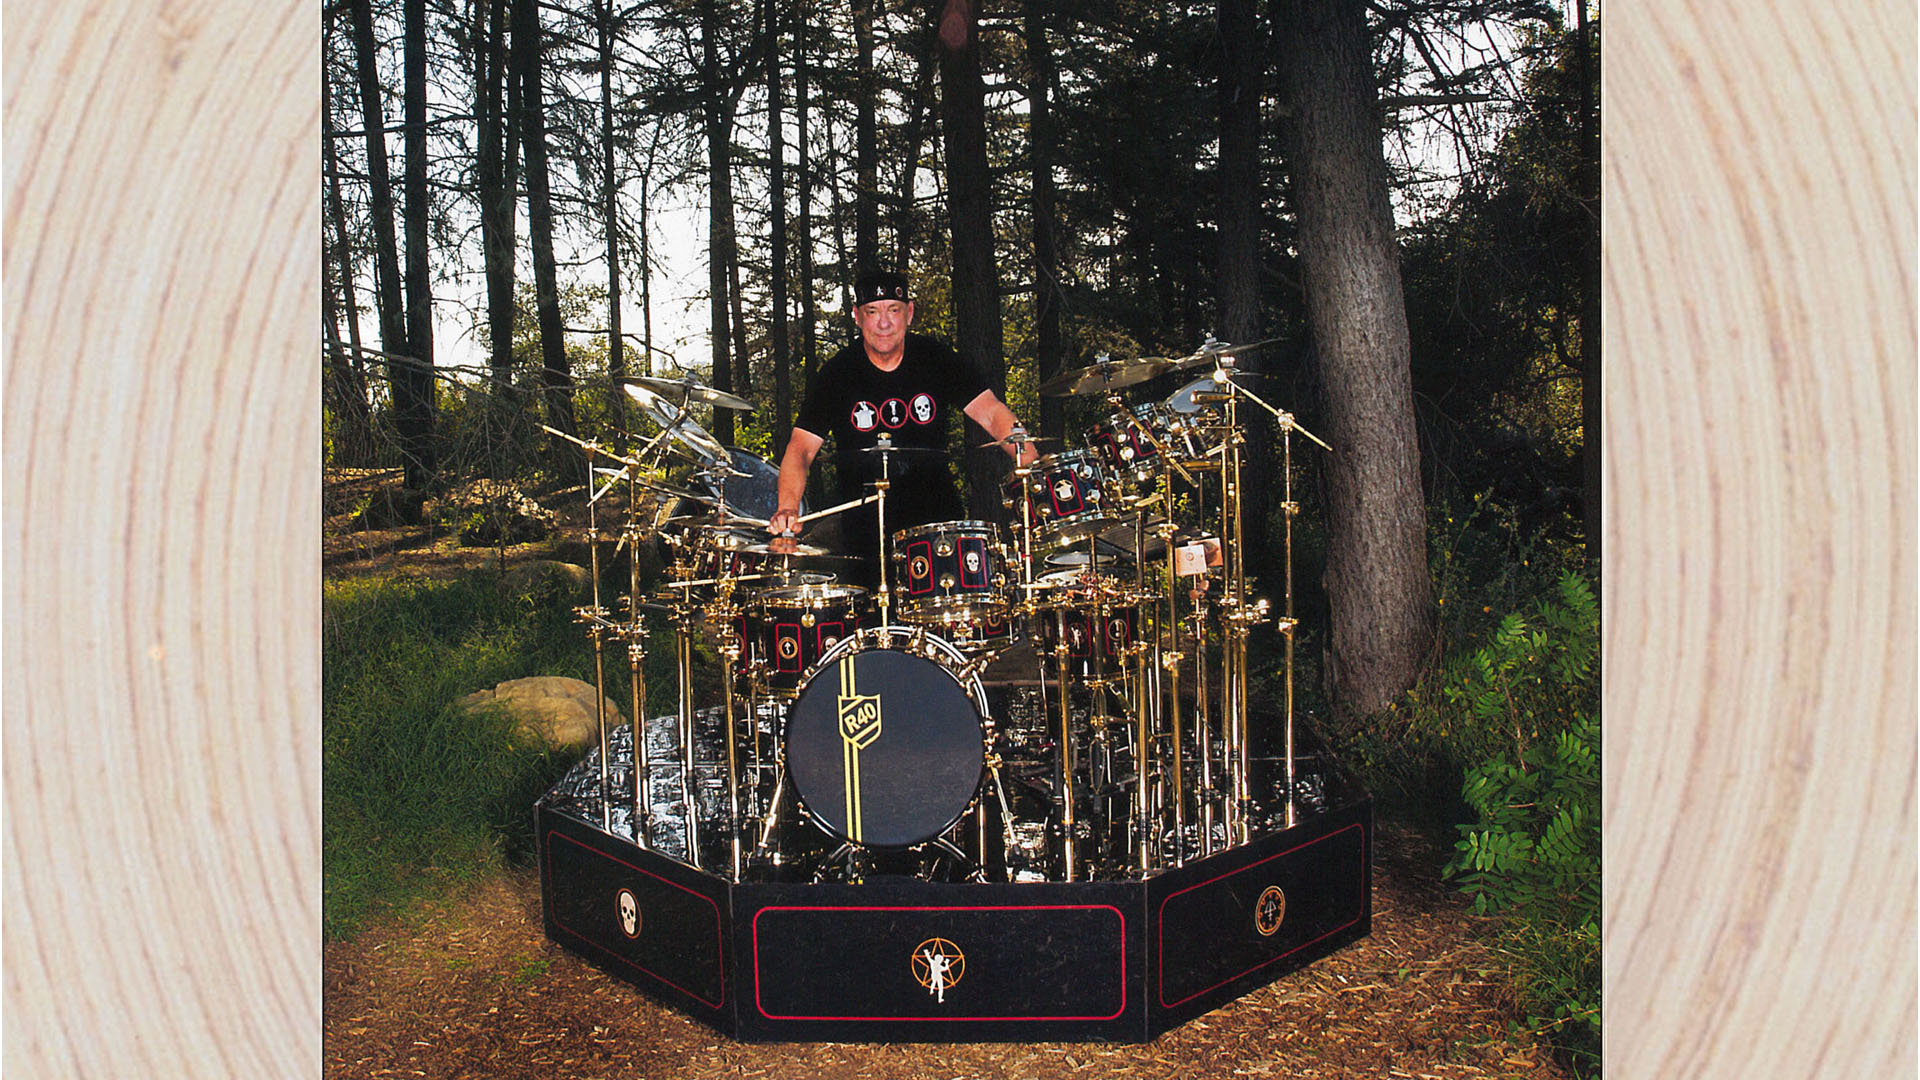 R40 Tourbook, click to enlarge